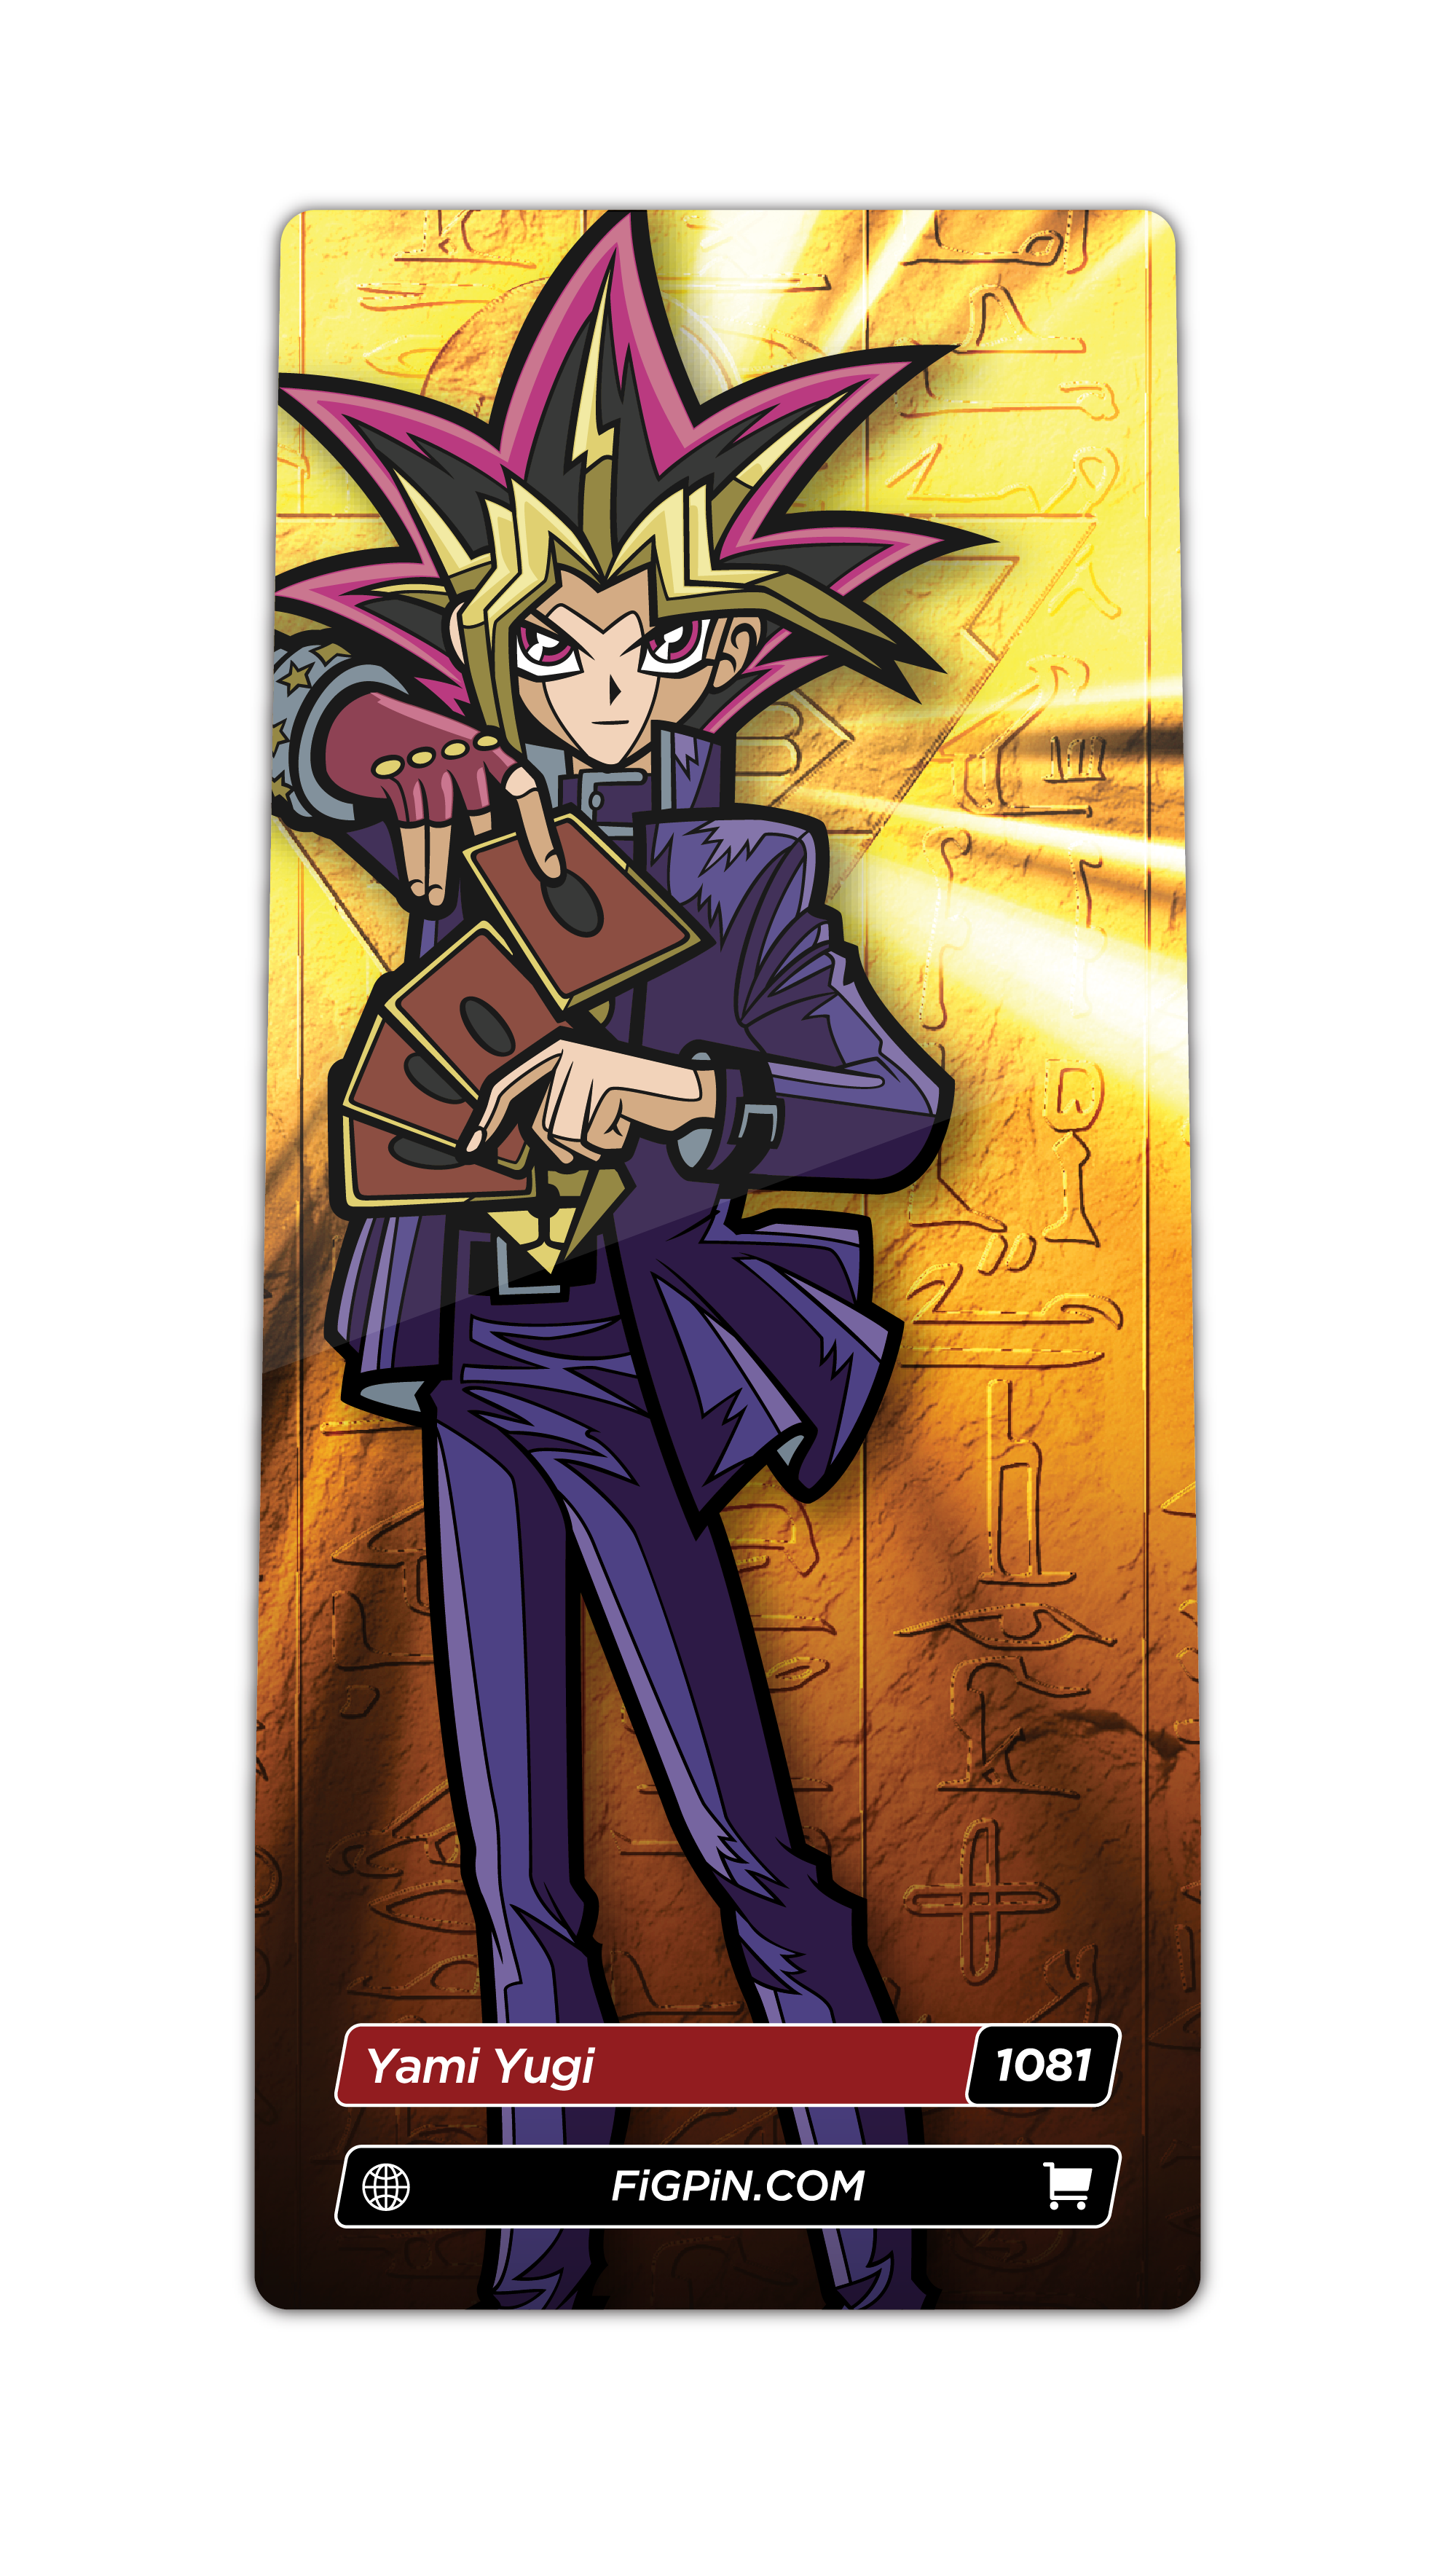 Character card of gold plated Yami Yugi with text "Yami Yugi (1081)” and link to FiGPiN’s website